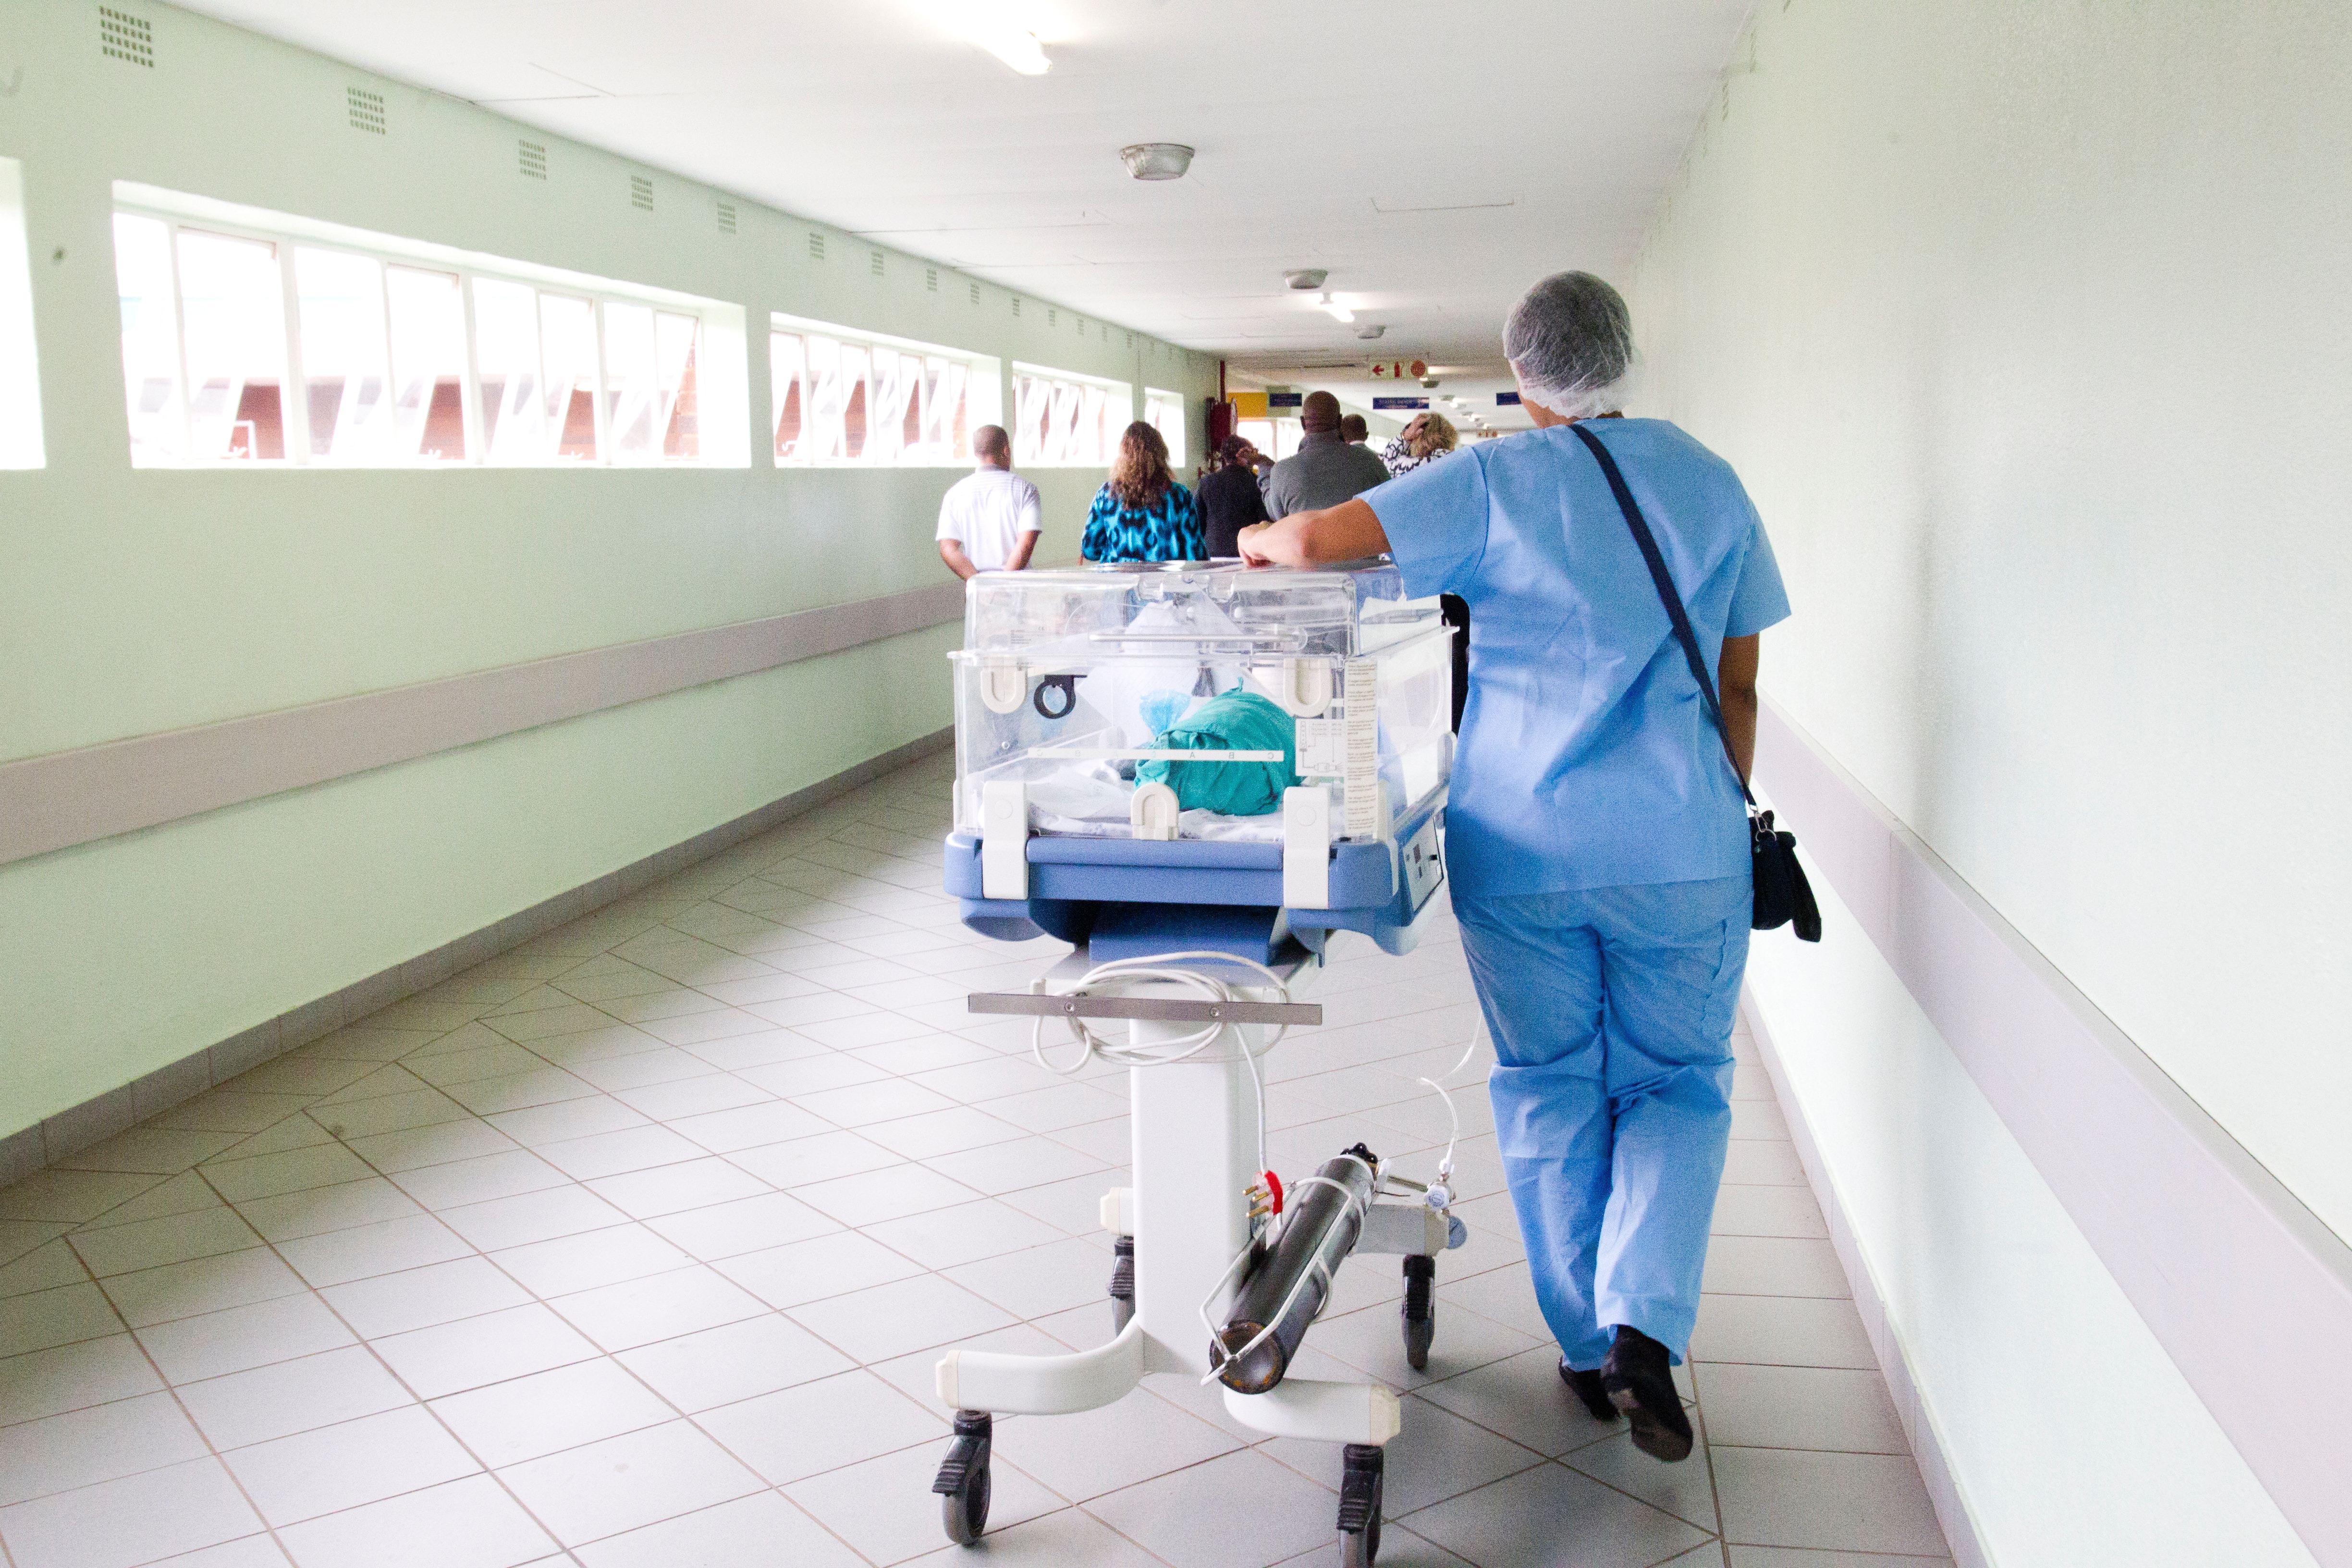 A nurse walking through a hospital hallway pushing along a container with a baby in it